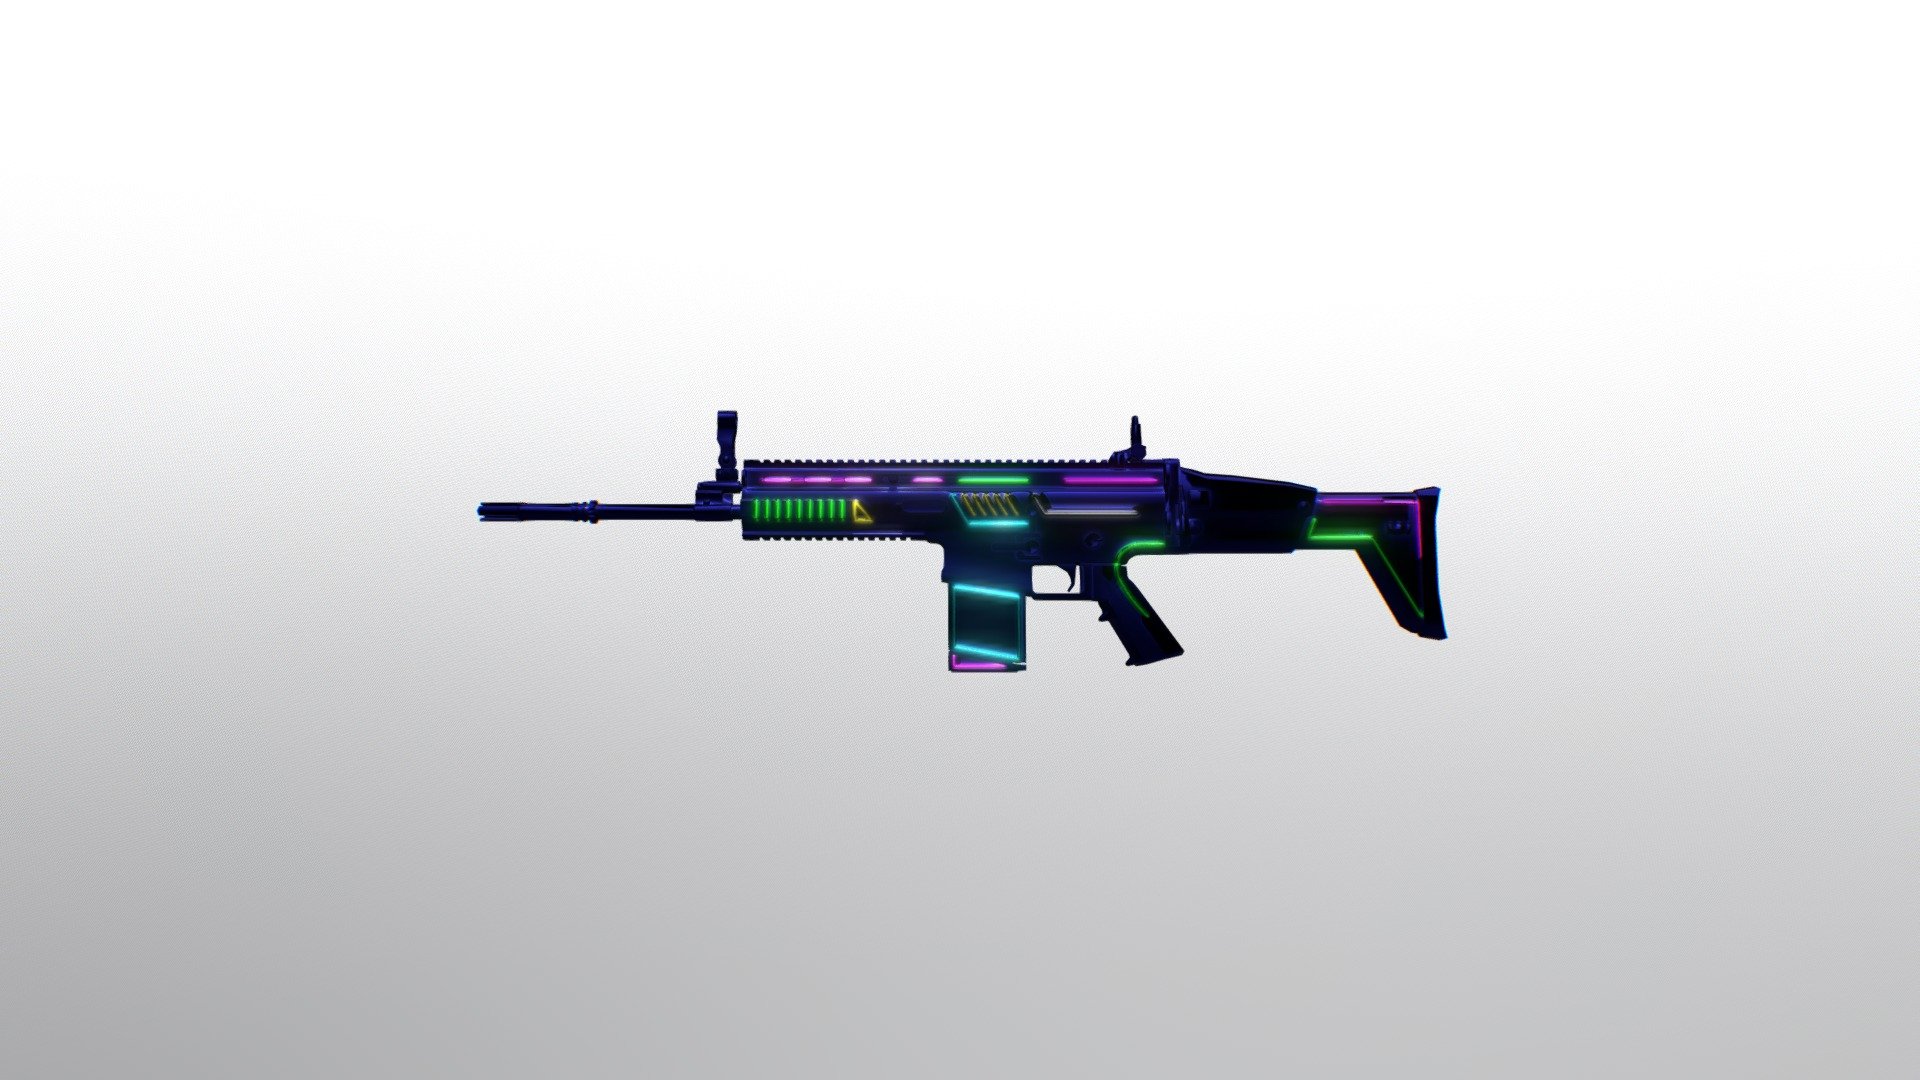 SCAR-H | Neon Blazer

Submission for #VGODesign contest by VGO.gg

Made by twitter.com/vncidesign - SCAR-H | Neon Blazer - 3D model by vnci 3d model